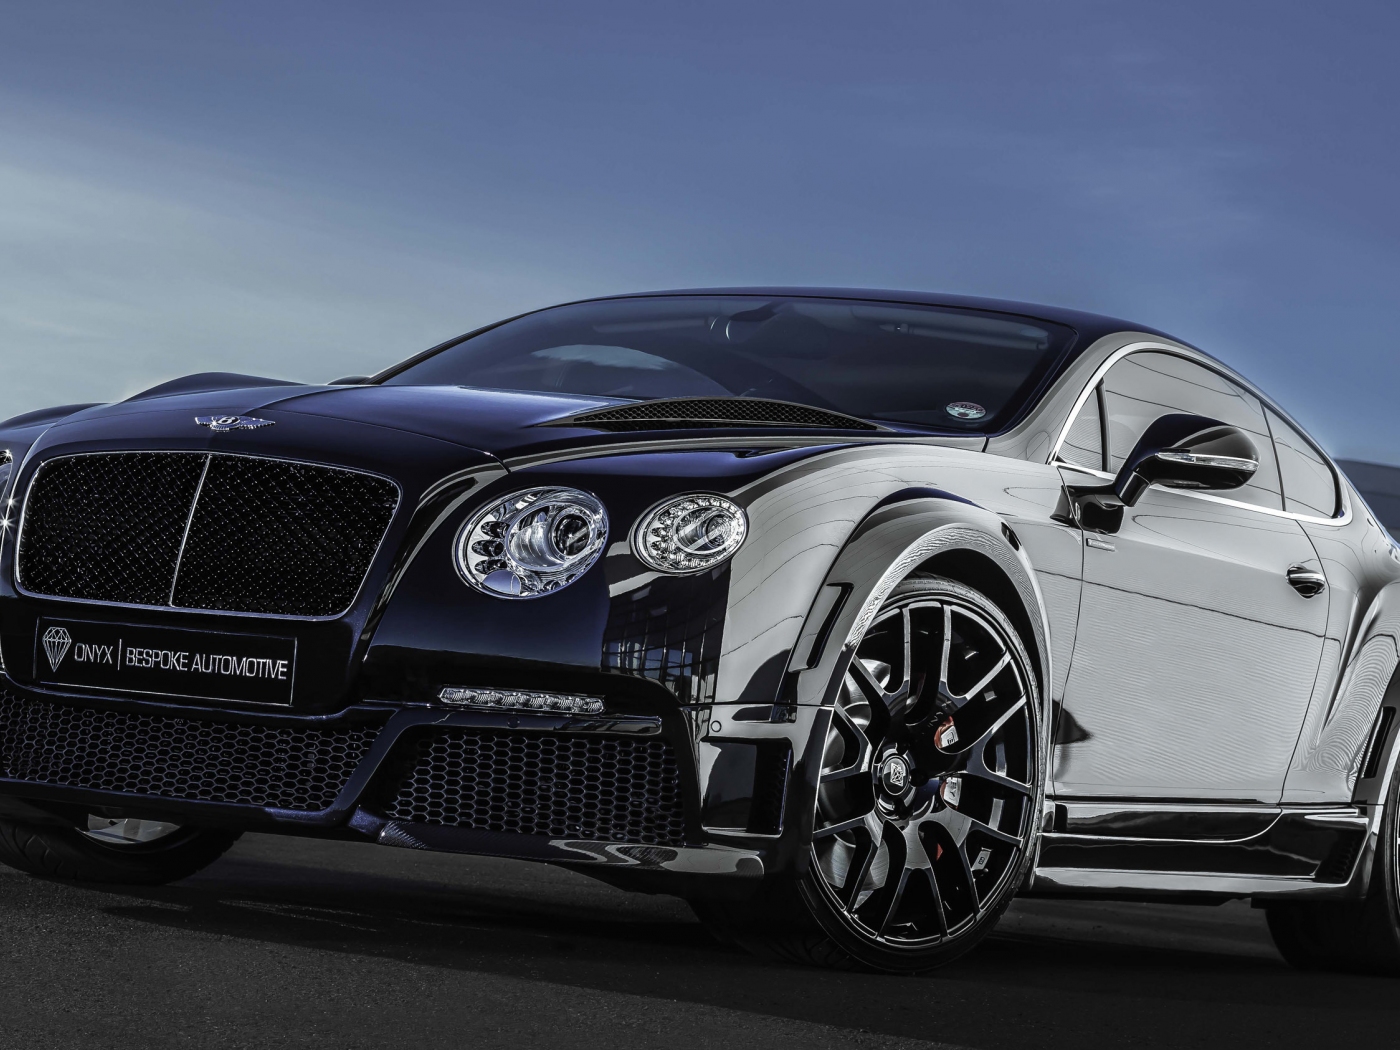 gt, onyx, continental, bentley, tuning, black, front